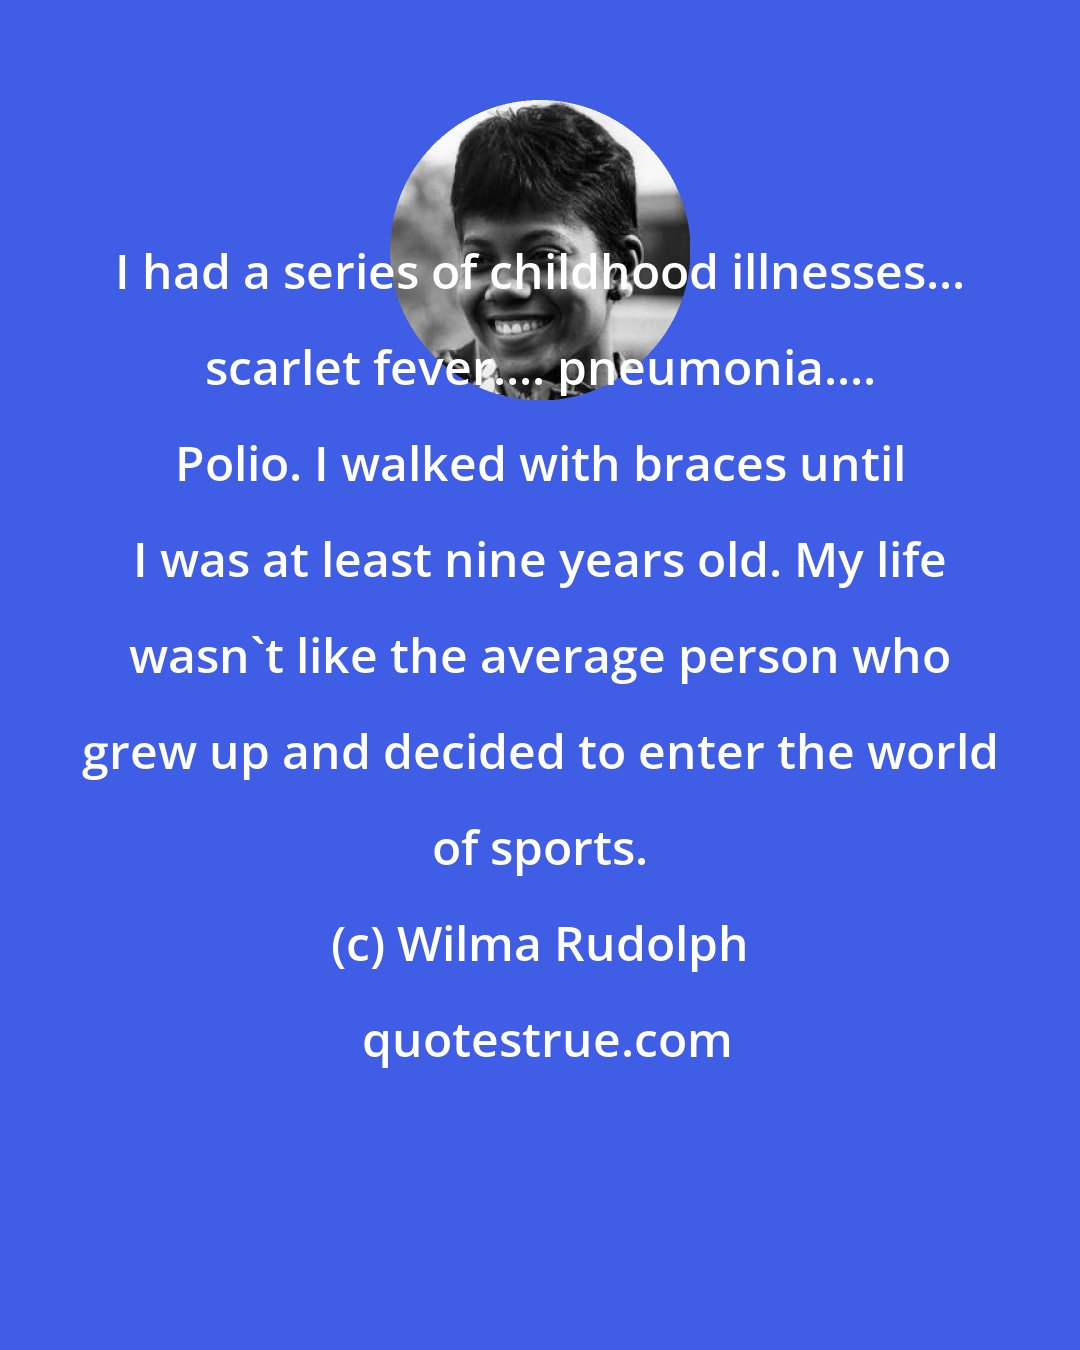 Wilma Rudolph: I had a series of childhood illnesses... scarlet fever.... pneumonia.... Polio. I walked with braces until I was at least nine years old. My life wasn't like the average person who grew up and decided to enter the world of sports.